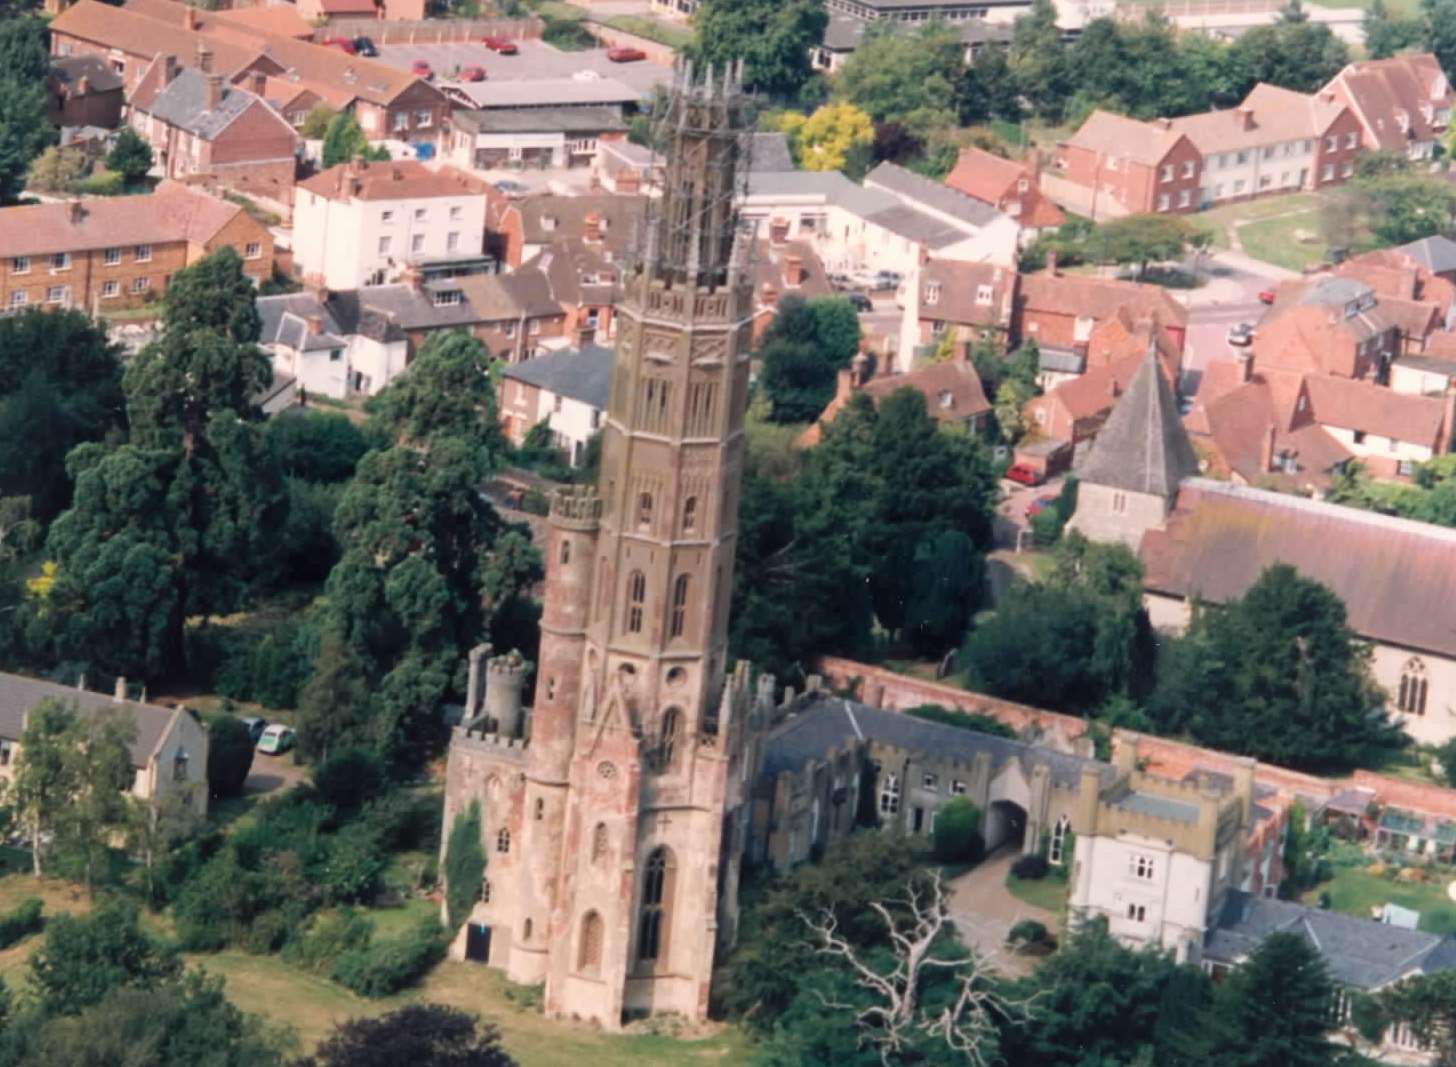 Hadlow Tower is owned by the Vivat Trust